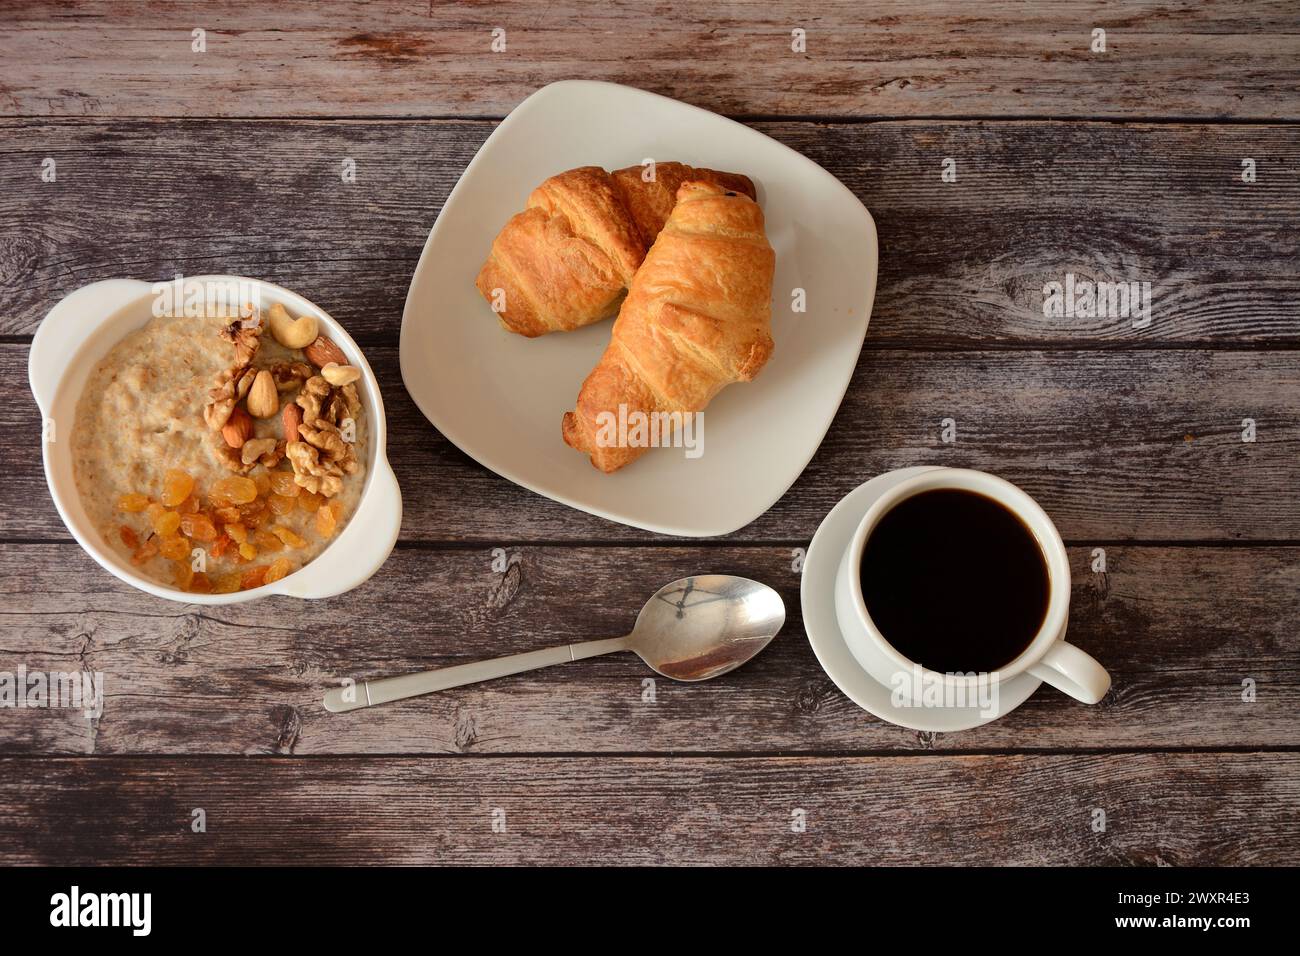 A plate of oatmeal with raisins and nuts, a plate with two fresh croissants and a cup of hot black coffee on a wooden table. Top view, flat lay. Stock Photo